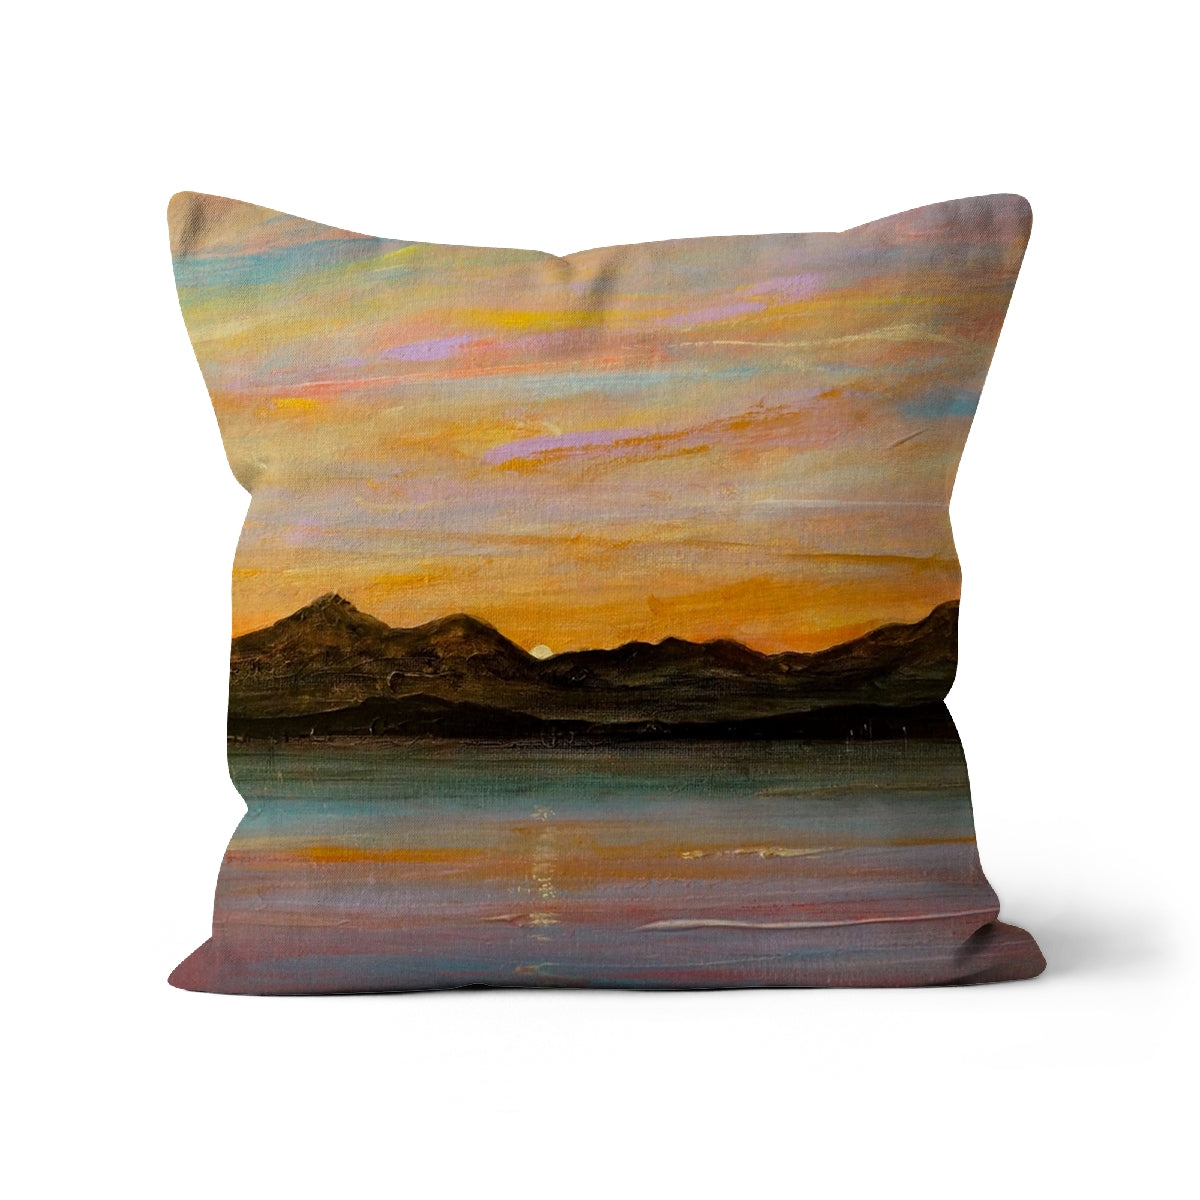 The Sleeping Warrior Arran Art Gifts Cushion-Cushions-Arran Art Gallery-Faux Suede-18"x18"-Paintings, Prints, Homeware, Art Gifts From Scotland By Scottish Artist Kevin Hunter